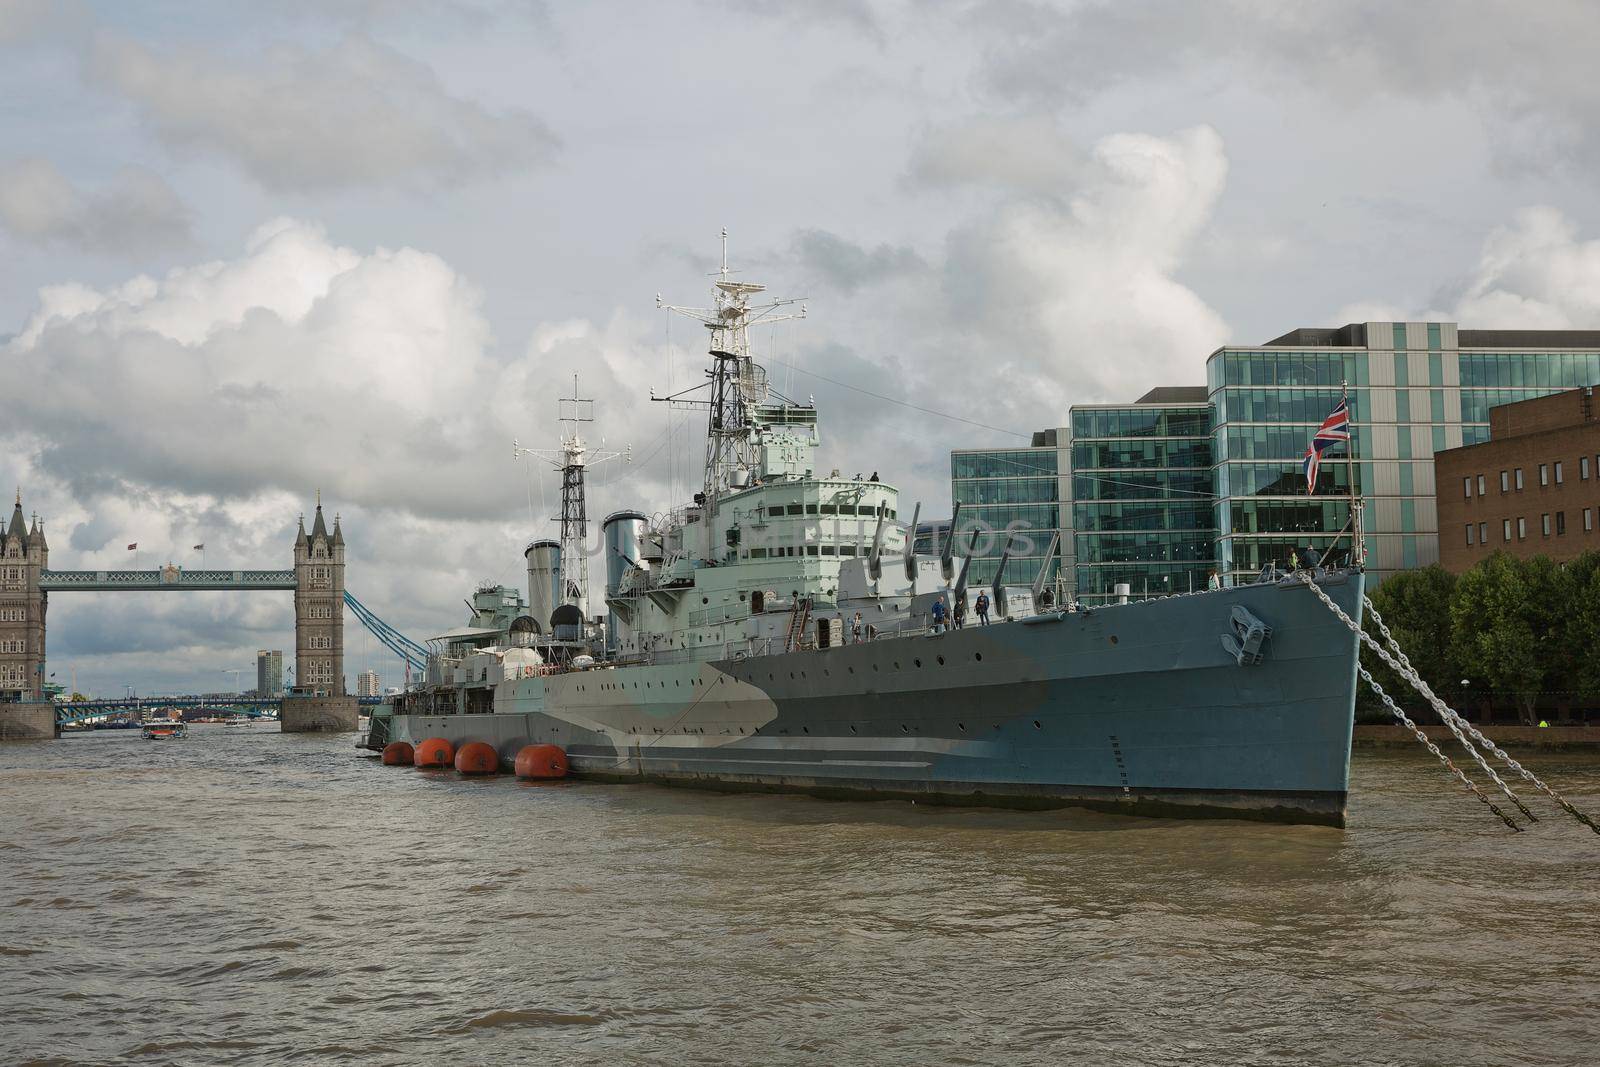 LONDON, UK - SEPTEMBER 08, 2017: HMS Belfast war ship on the Thames river with in London with the Tower bridge in the background.